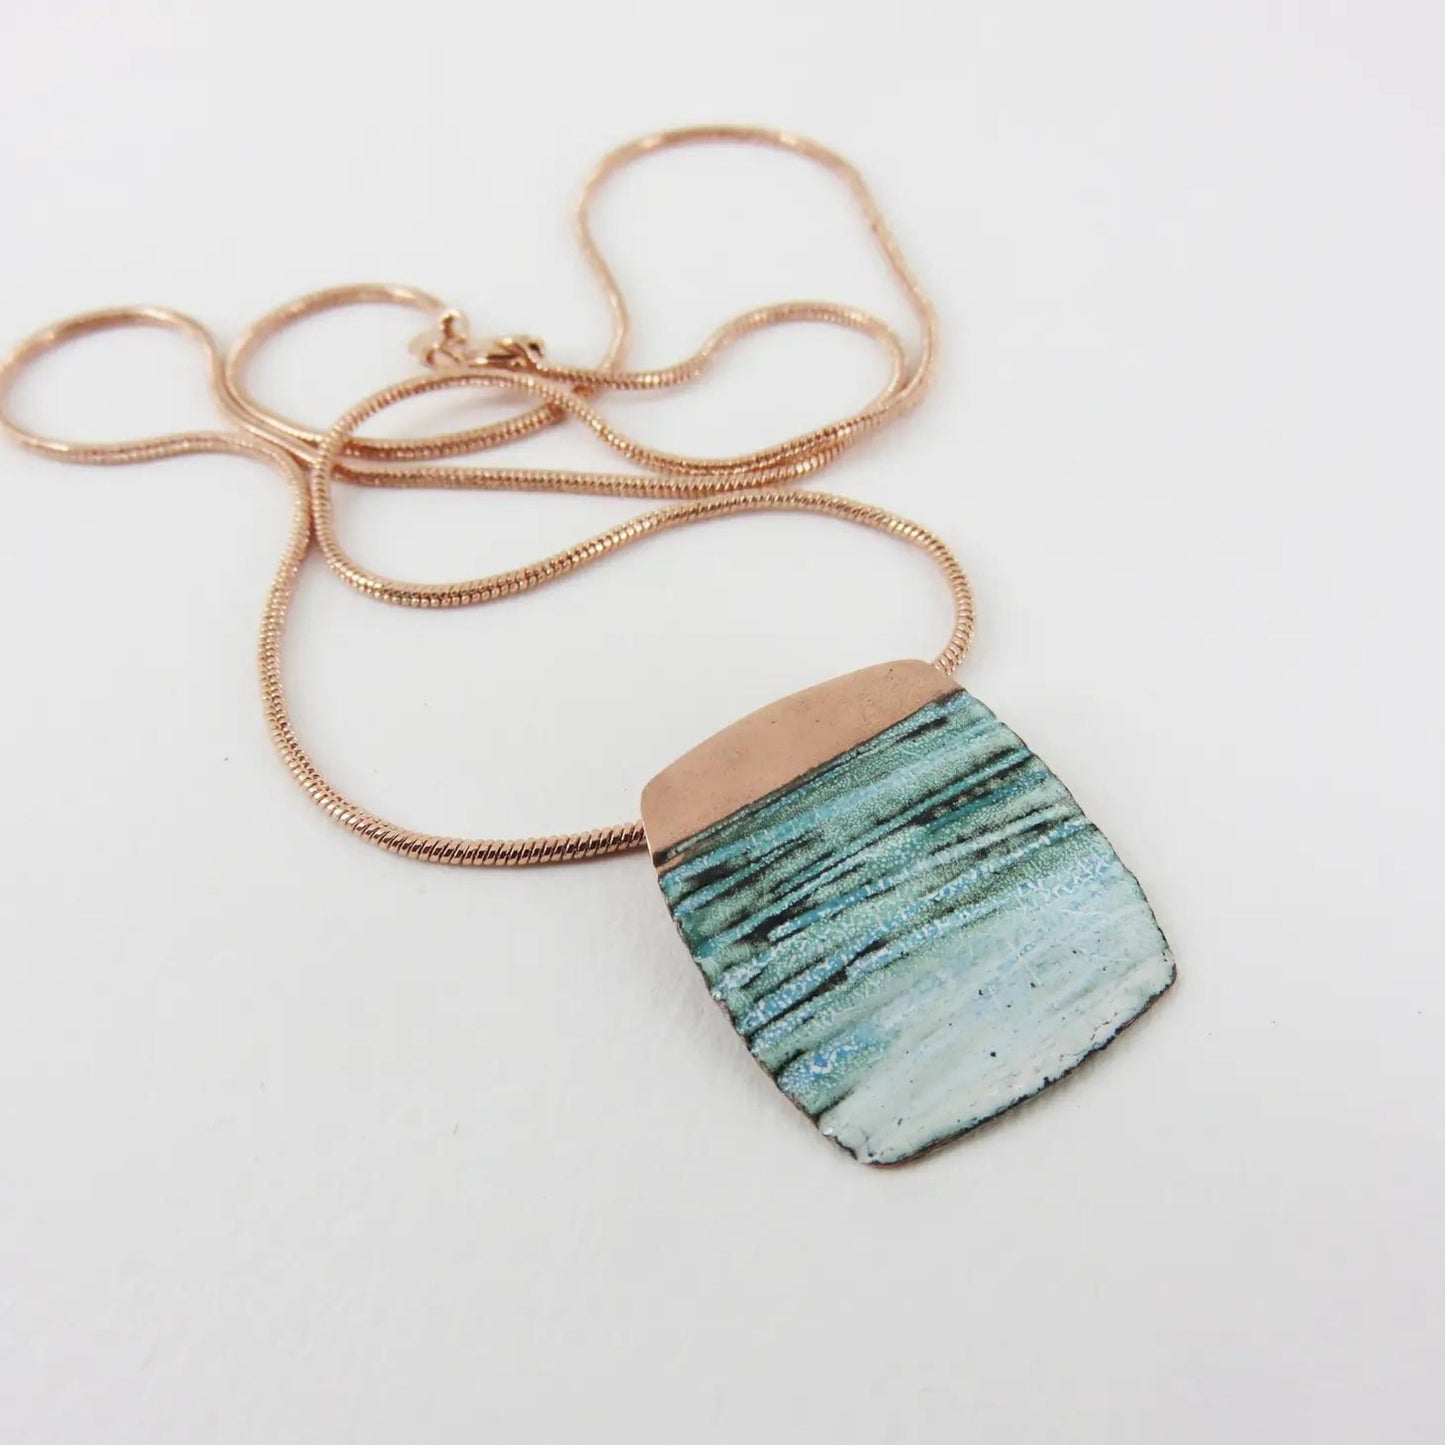 Copper and Enamel Textured Pendant in Teal and White - The Little Jewellery Company